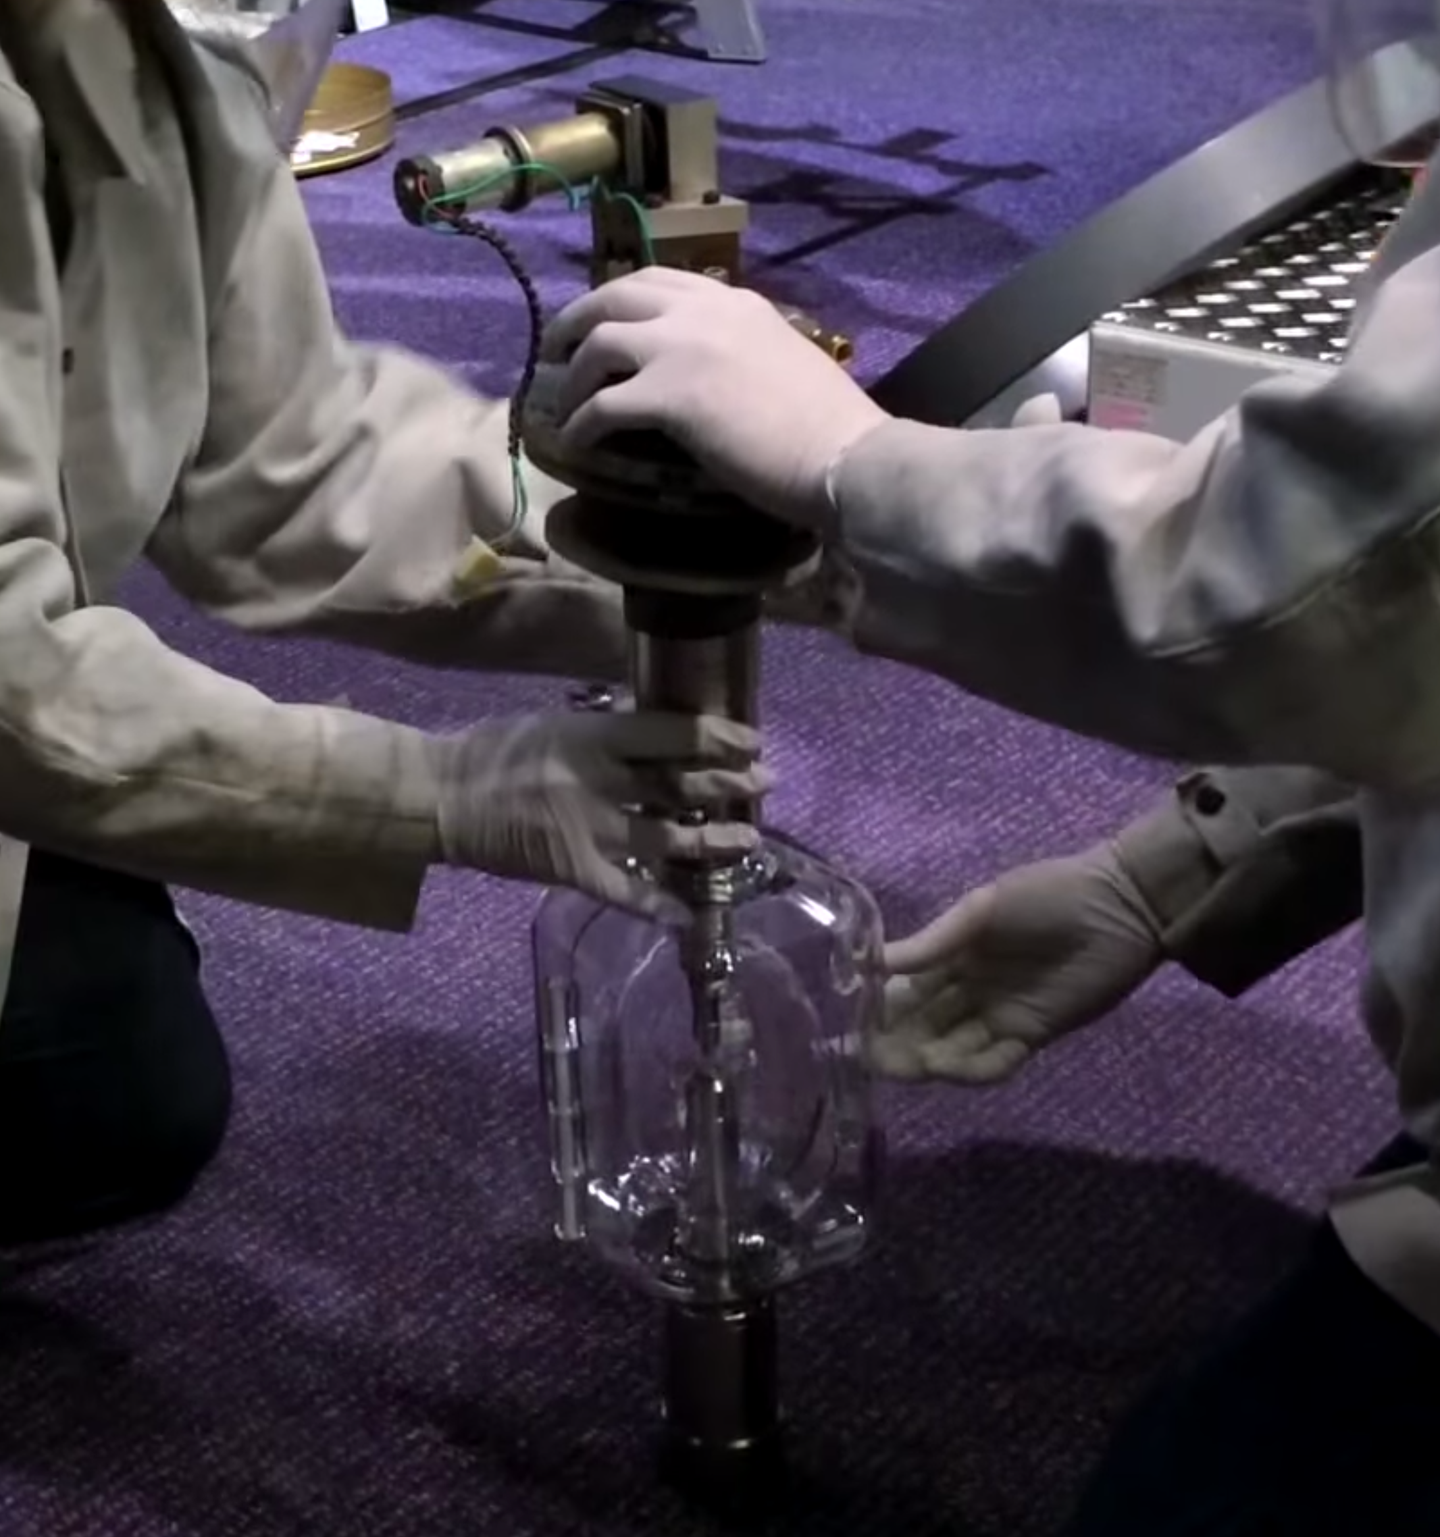 Watch The Elaborate Process Of Changing An IMAX Lightbulb